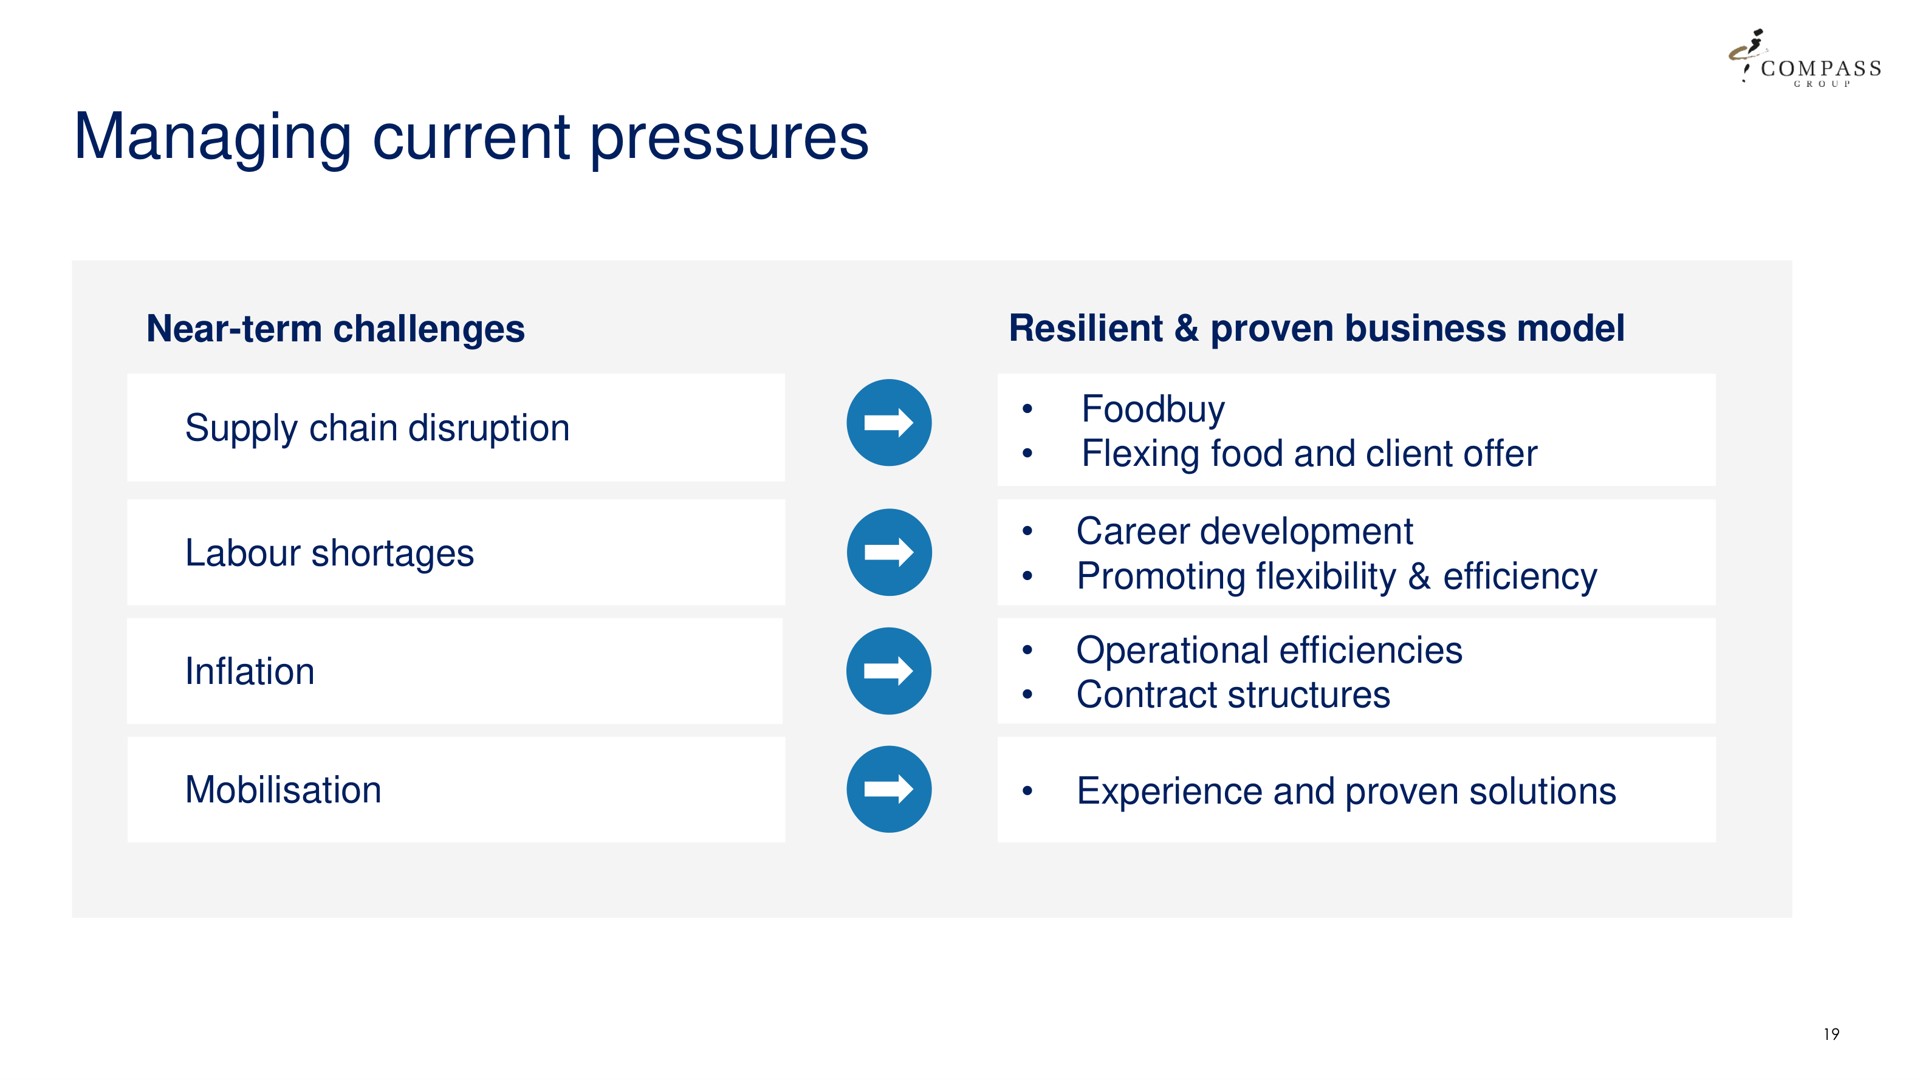 managing current pressures | Compass Group